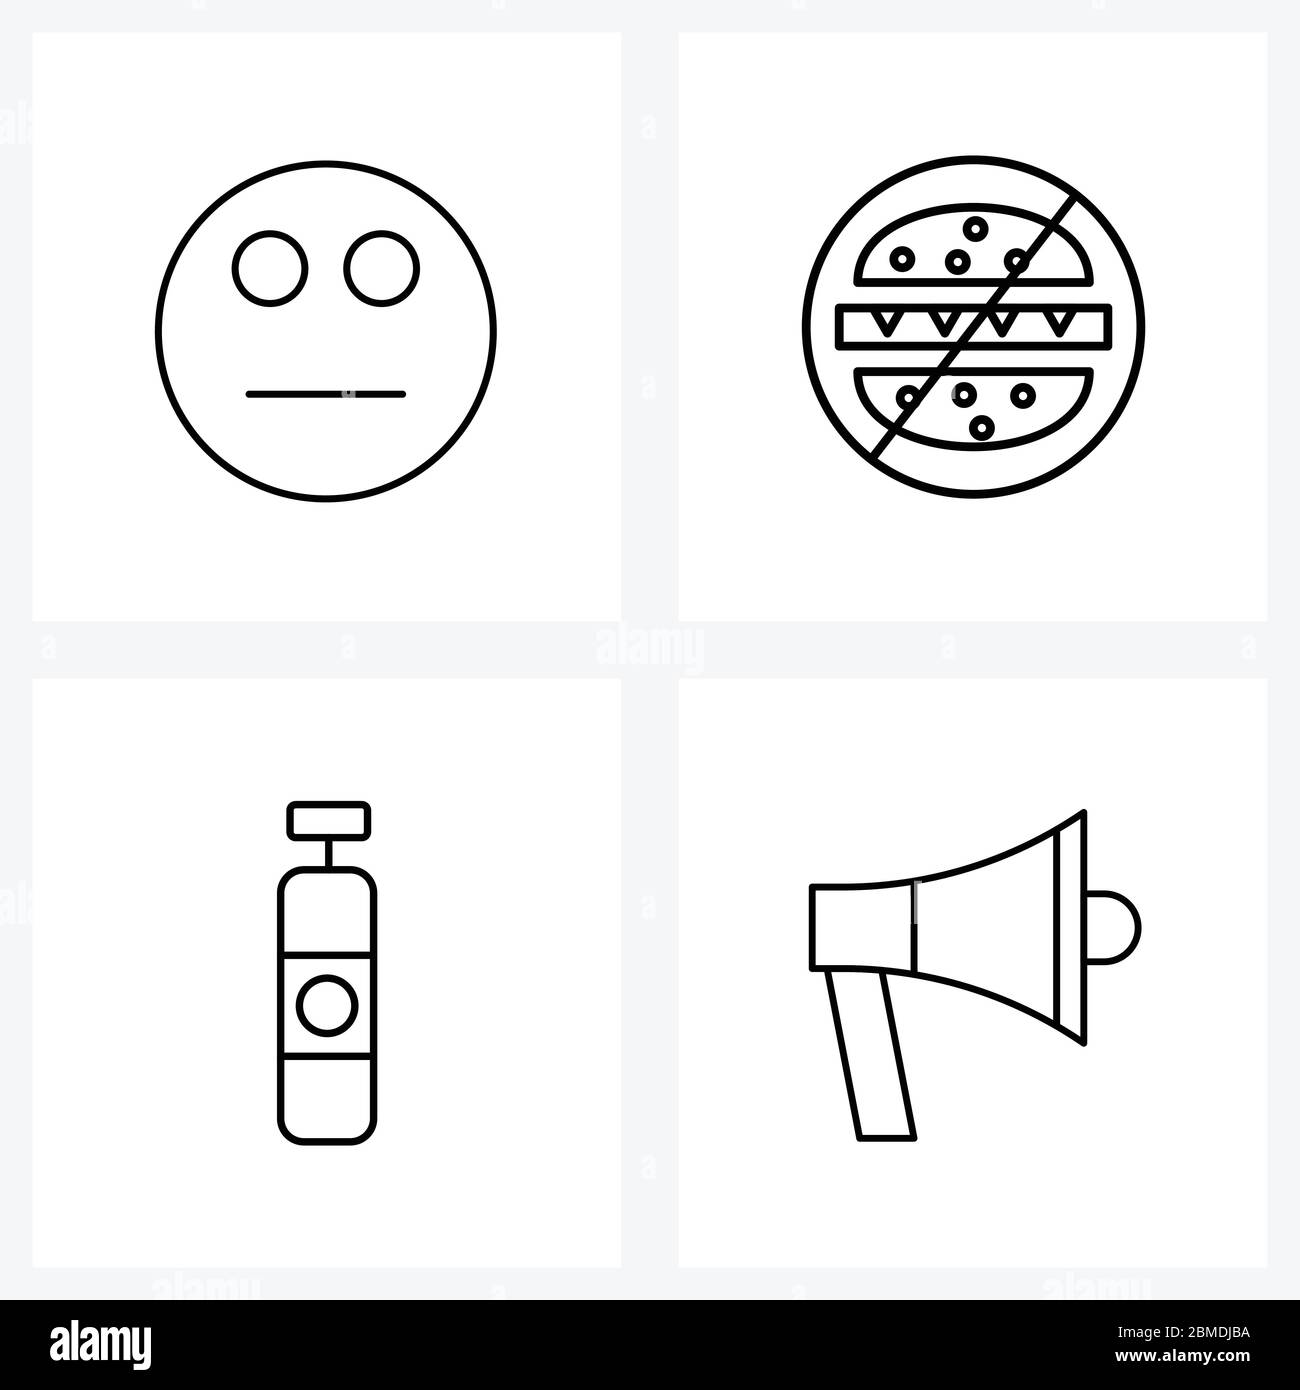 UI Set of 4 Basic Line Icons of emote, unhealthy food, neutral, no fast ...